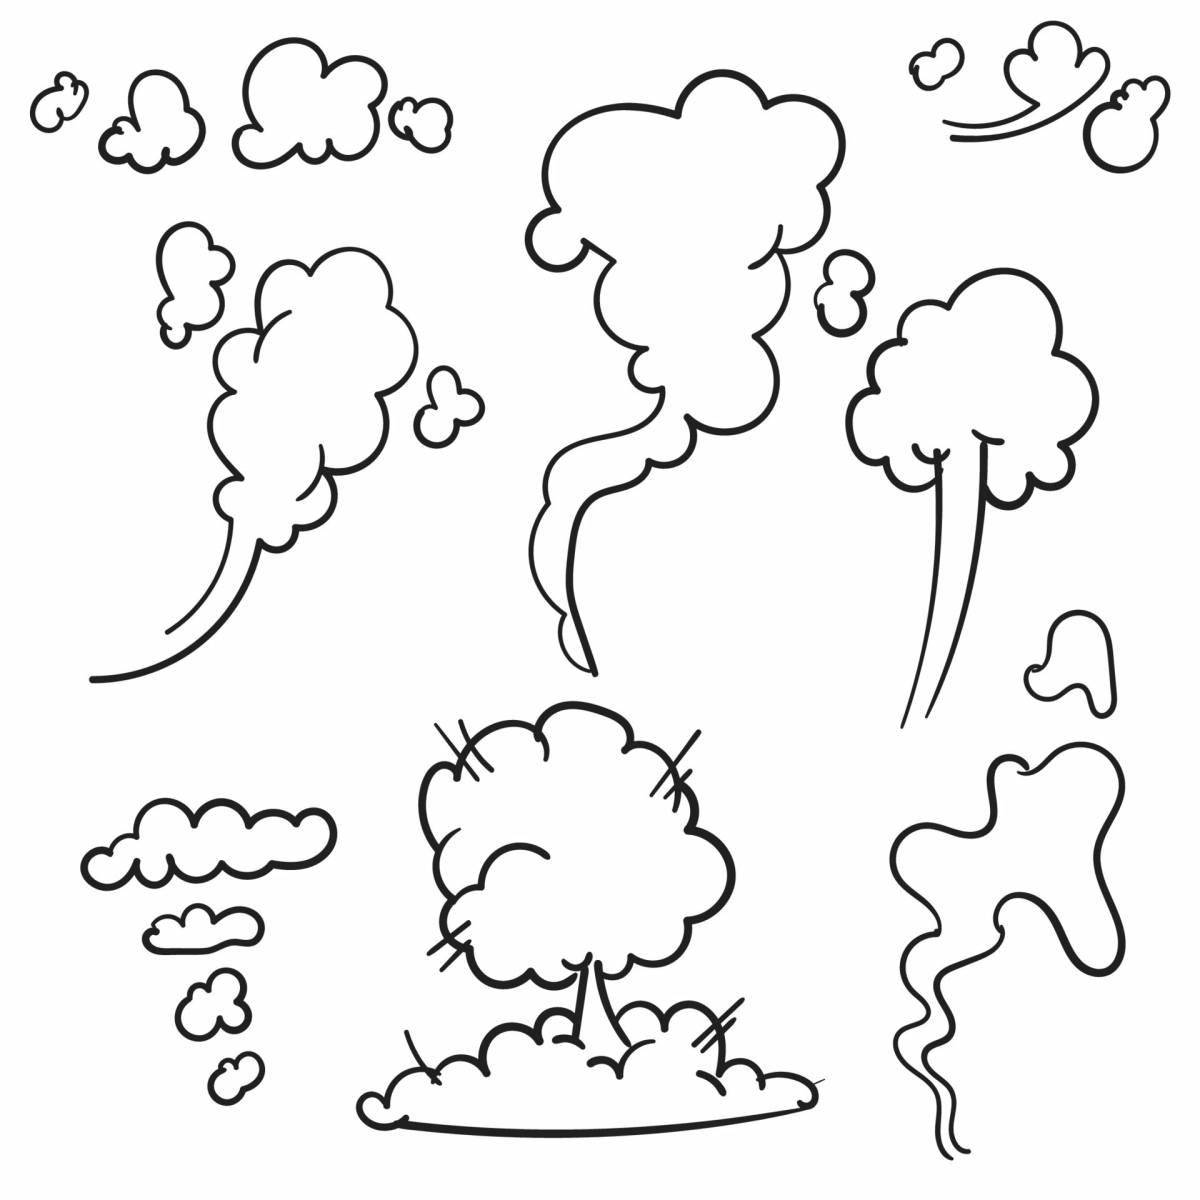 Colorful smoke coloring page for kids